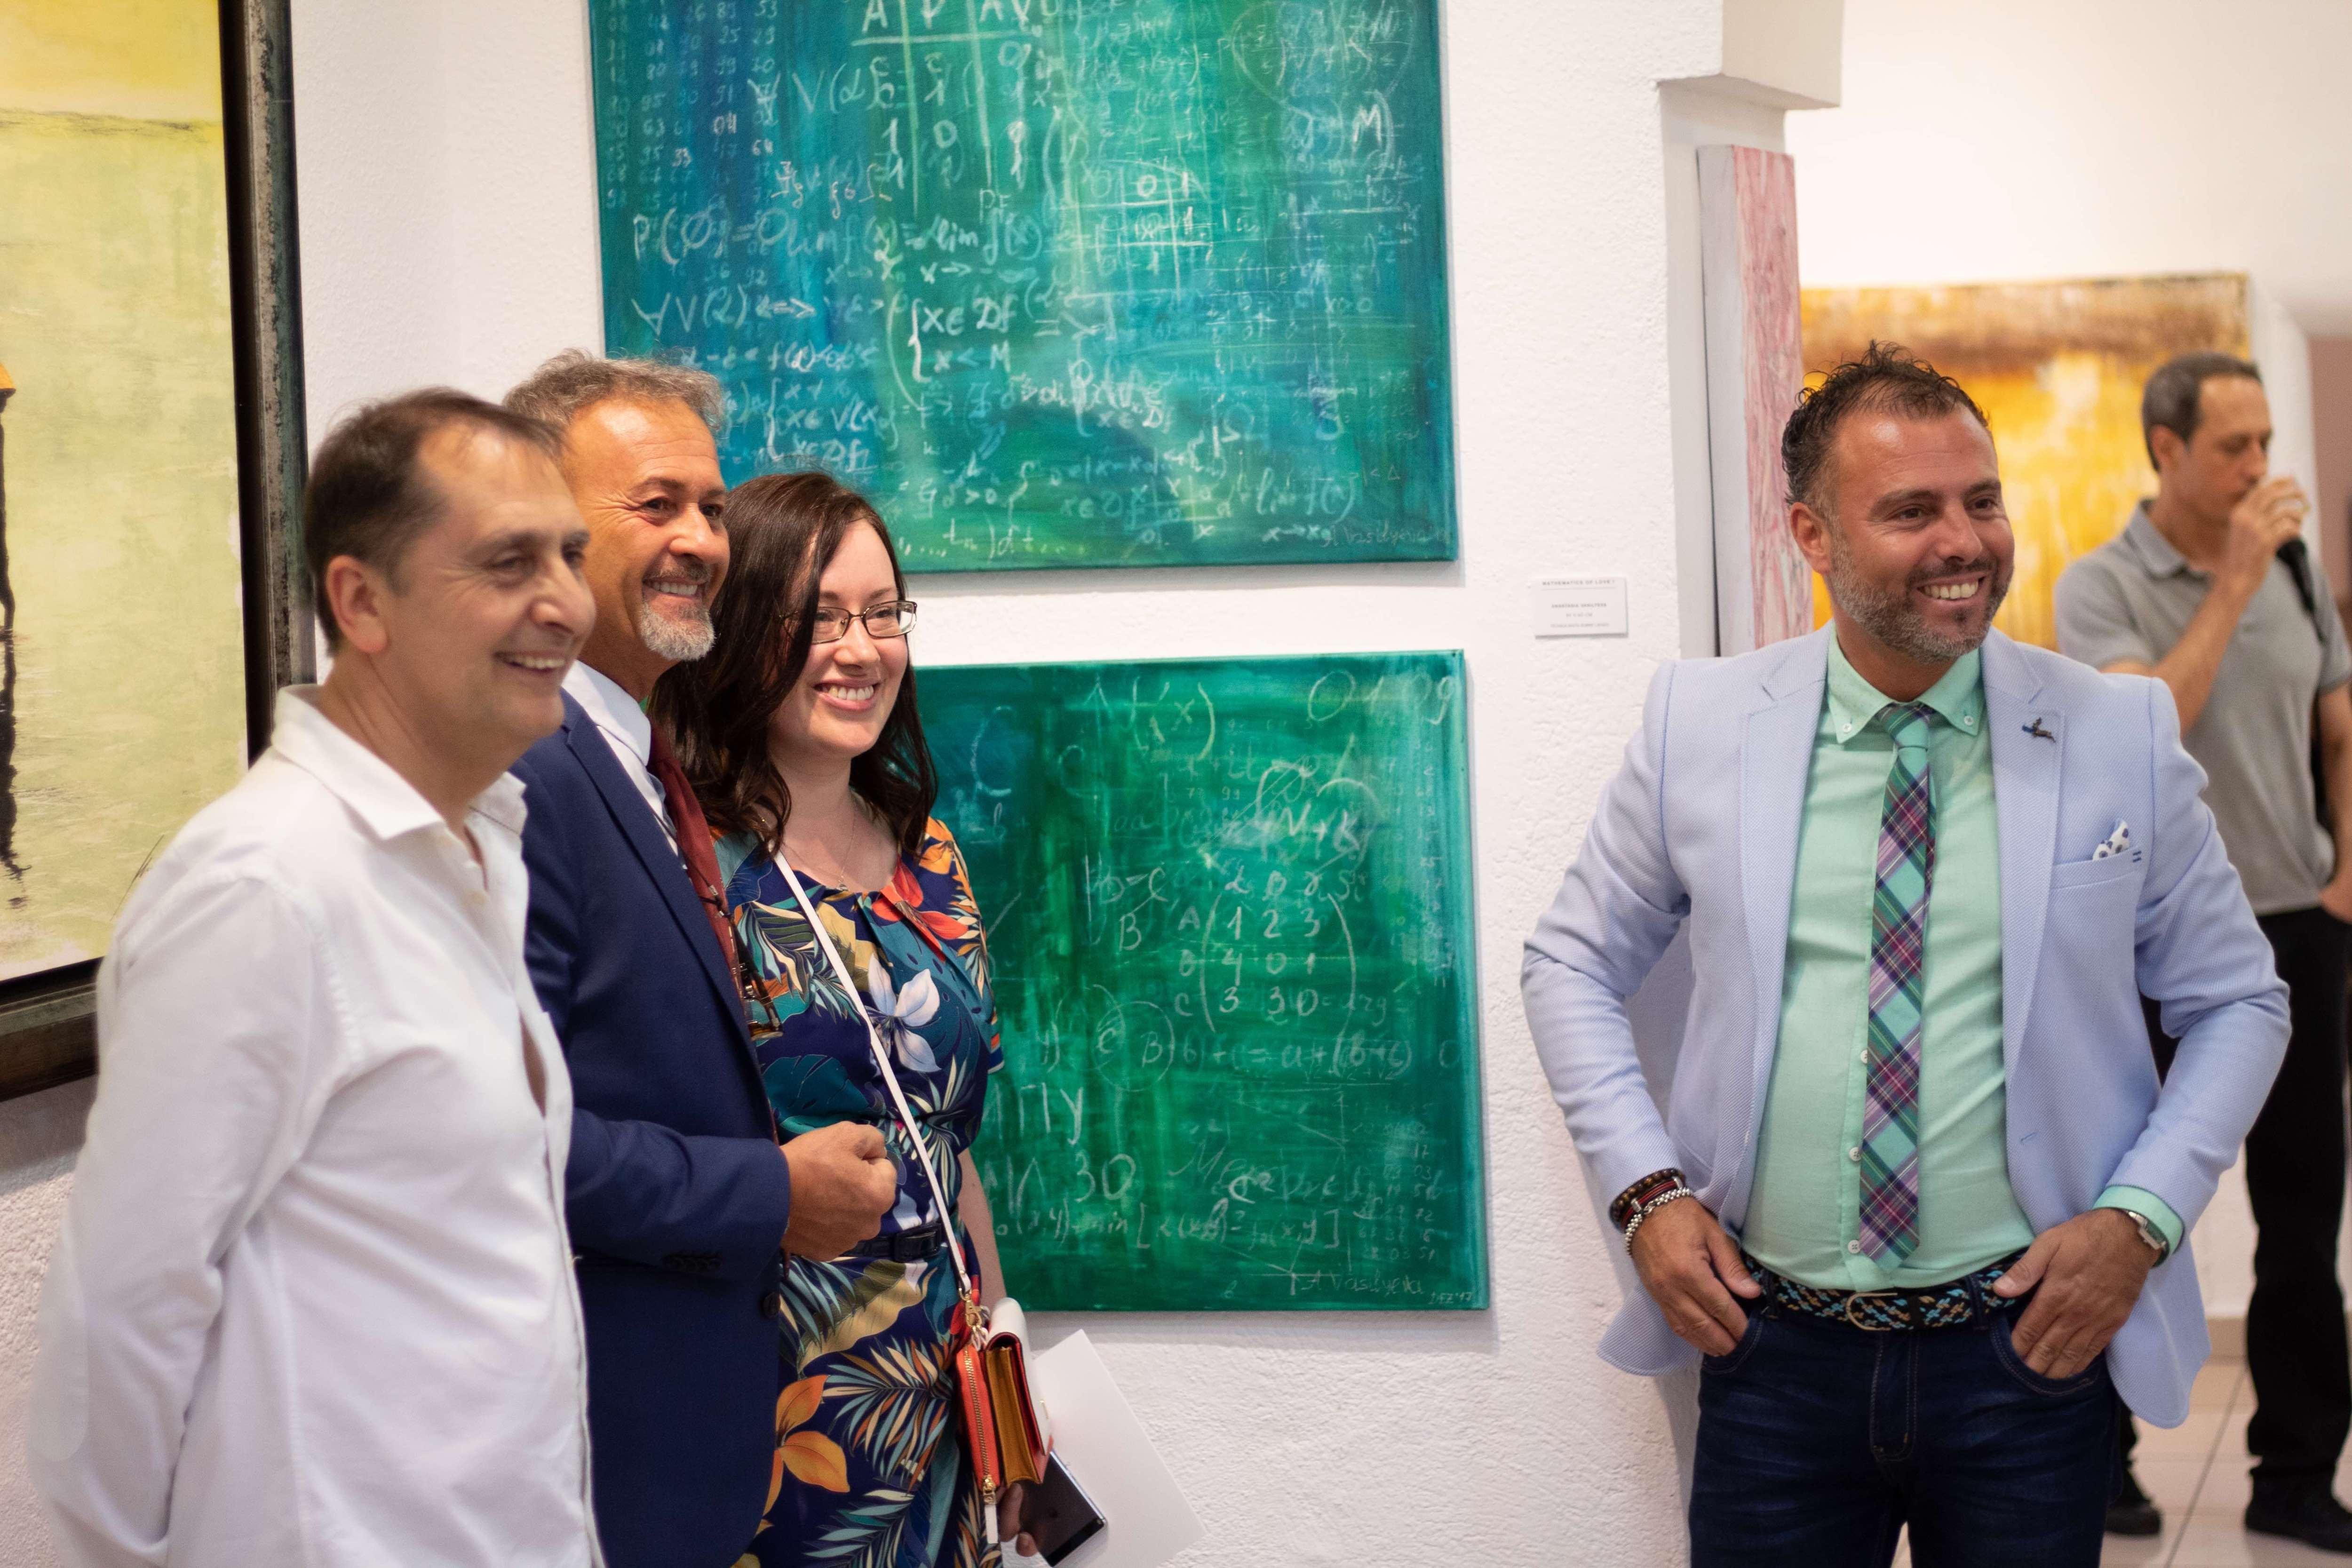 This painting was exhibited at the art exhibition in Innsbruck (Contemporary Art Fair 2019), as well as in Marbella (Excellence Art gallery), Florence (Art Expertise), and Madrid (APPA art gallery).
